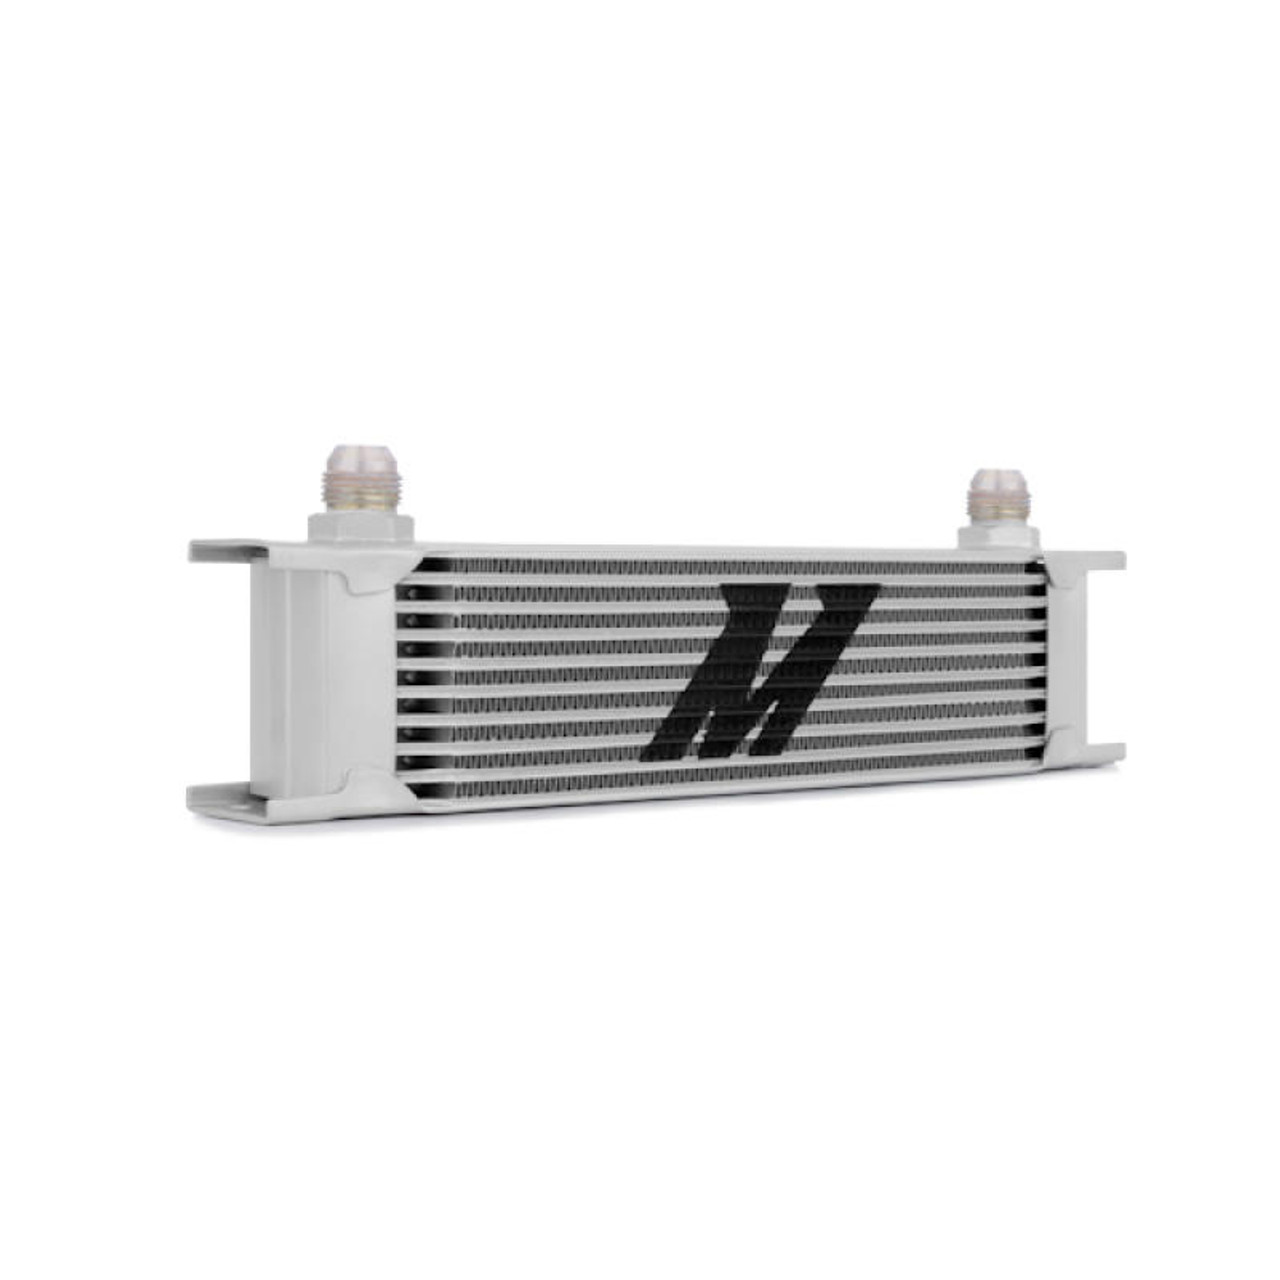 Mishimoto Universal 10 Row Oil Cooler - MMOC-10